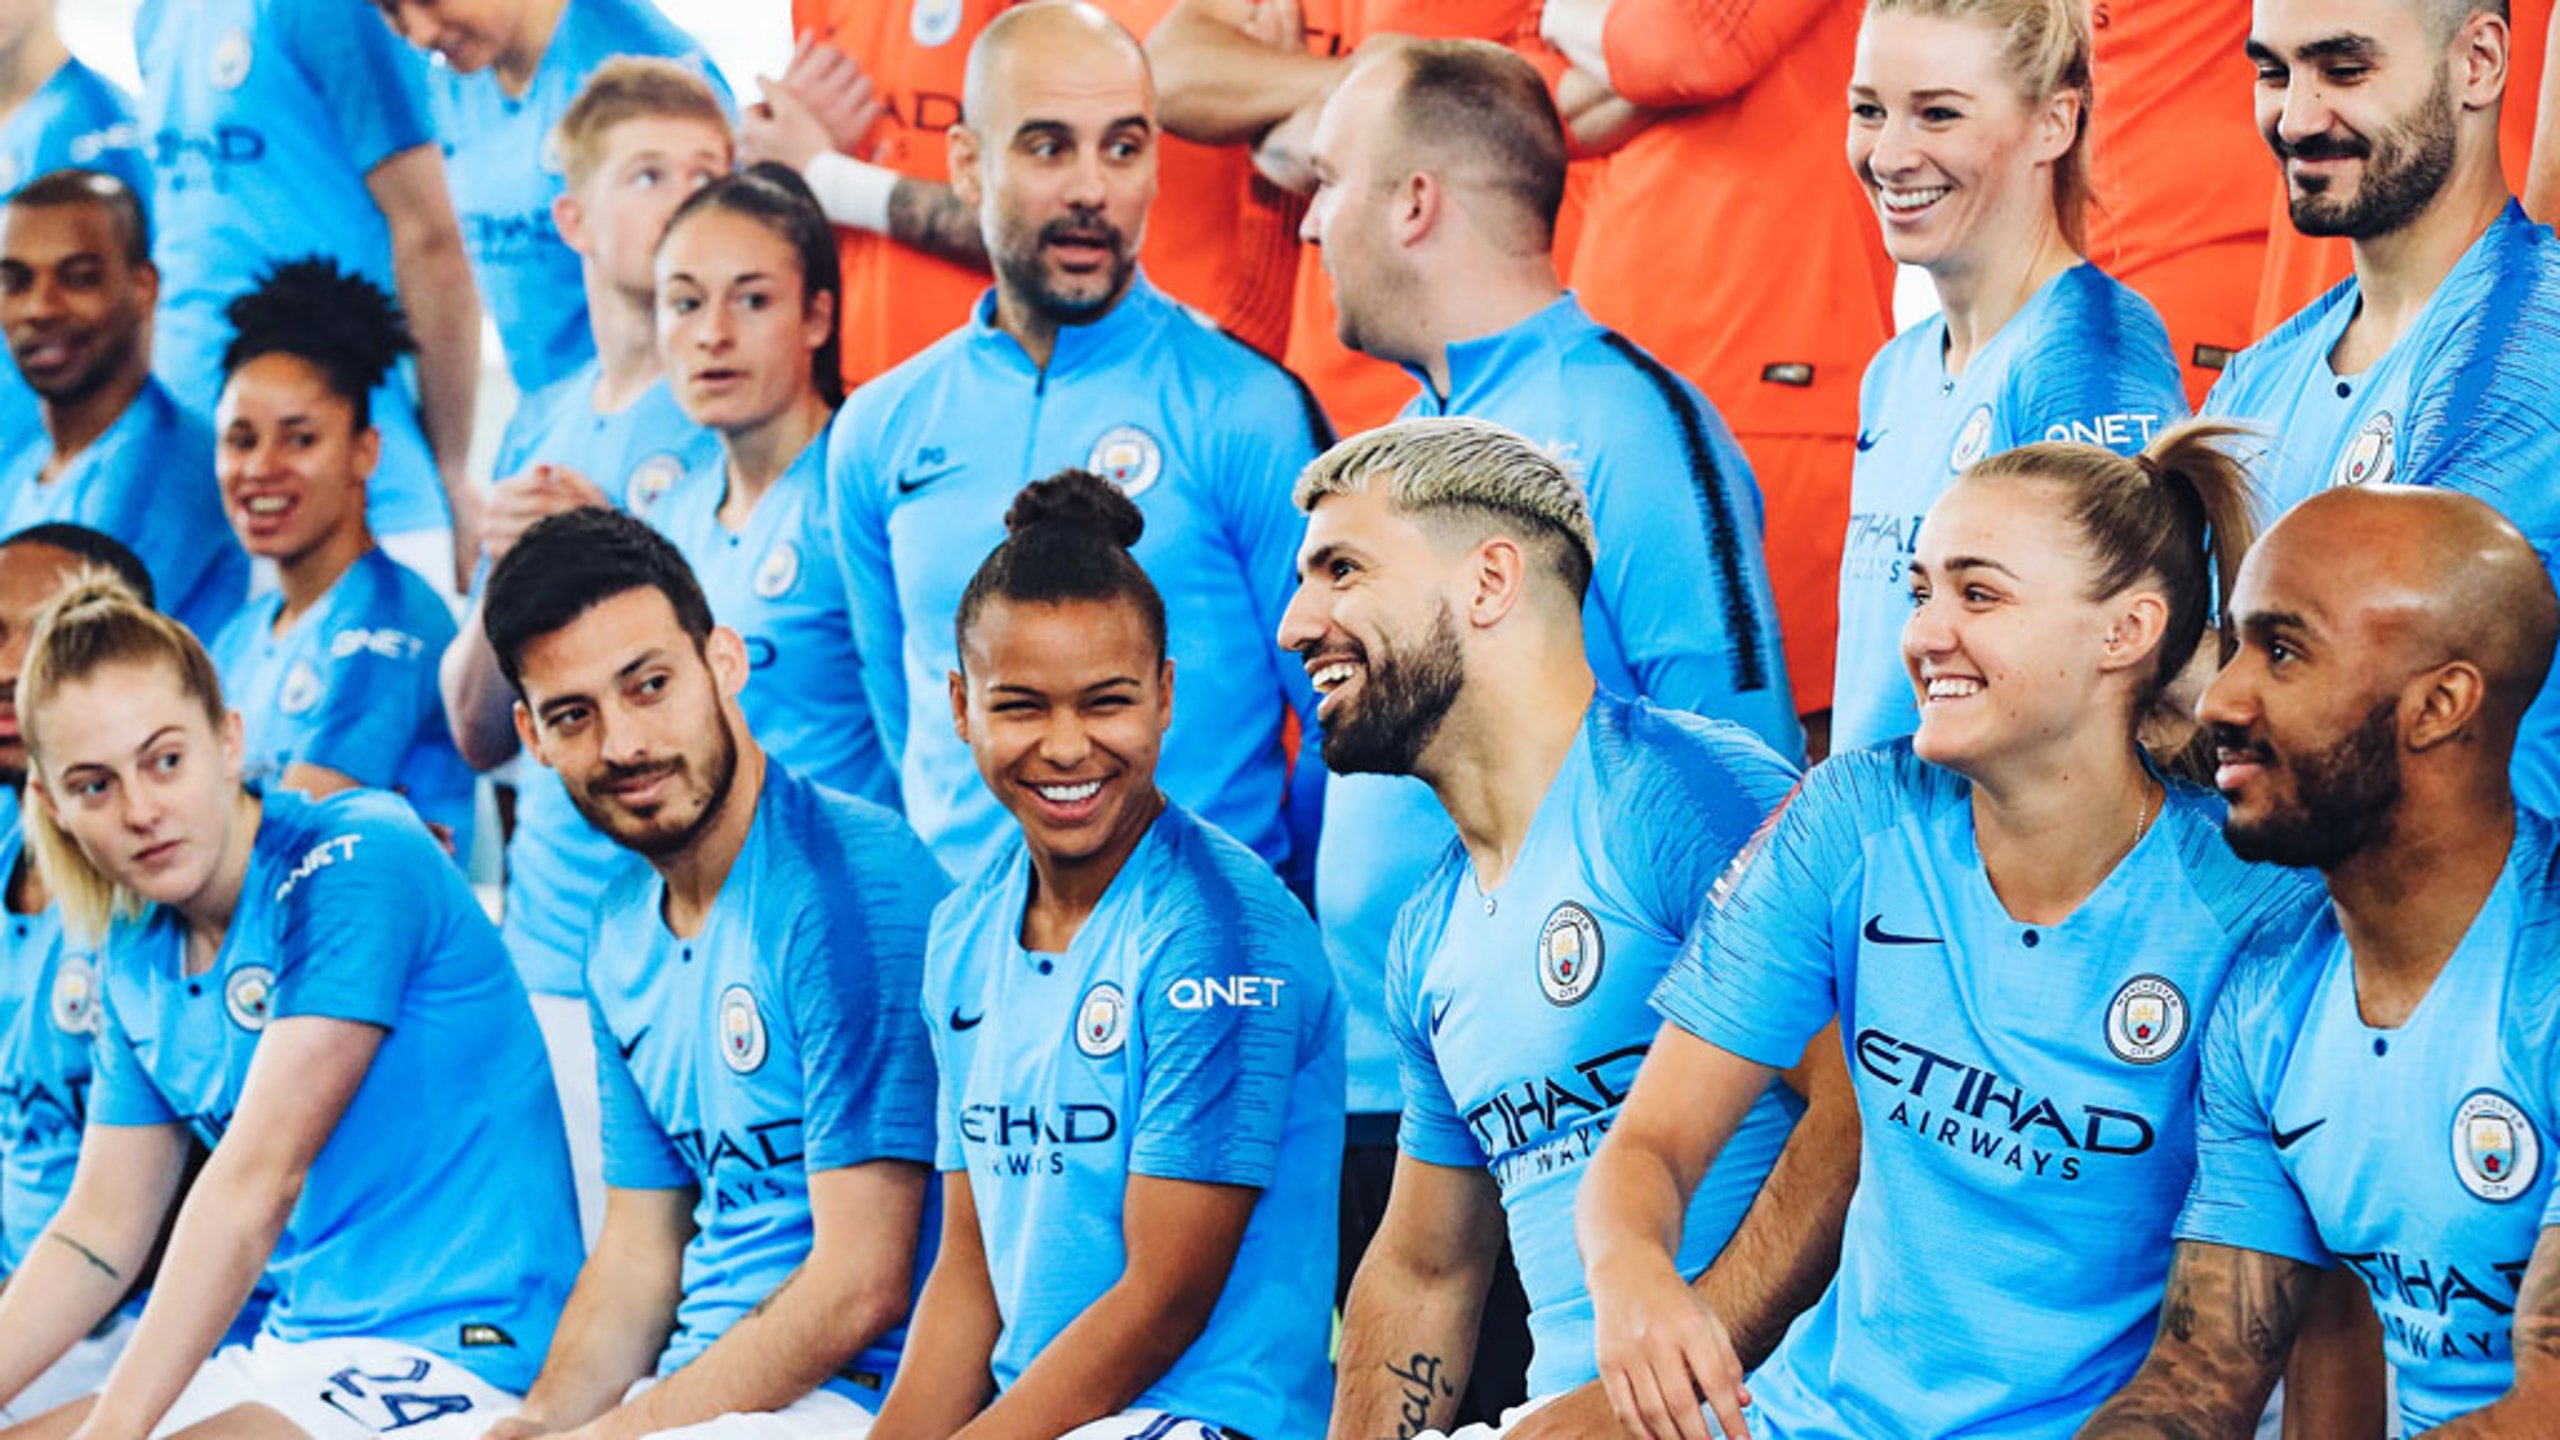 CENTRE STAGE: Nikita Parris and Sergio Aguero have every reason to smile given their superb form